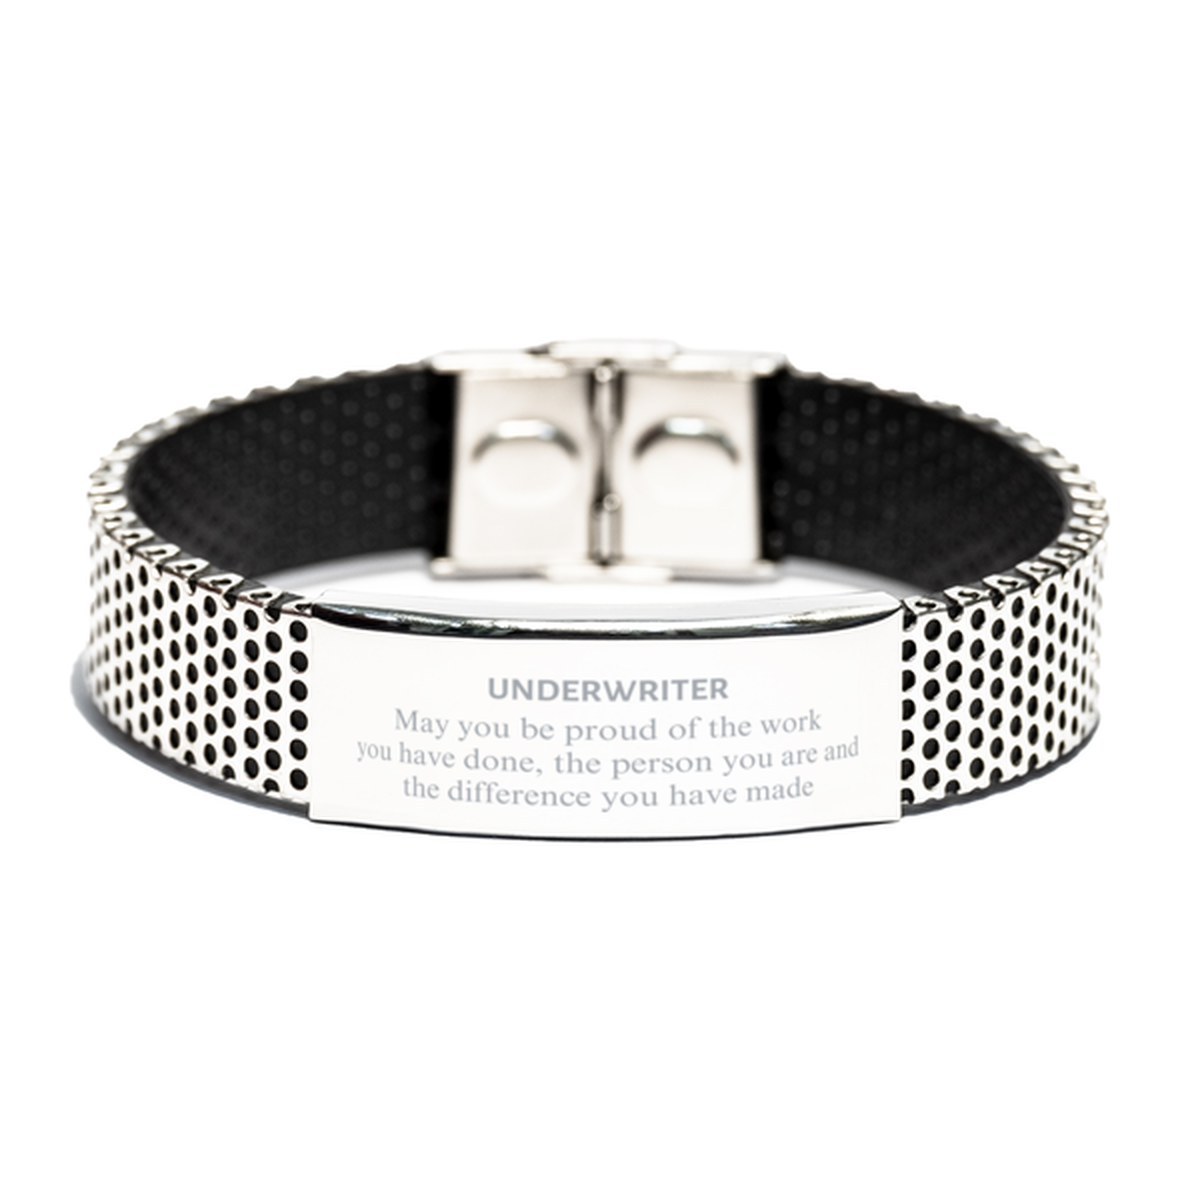 Underwriter May you be proud of the work you have done, Retirement Underwriter Stainless Steel Bracelet for Colleague Appreciation Gifts Amazing for Underwriter